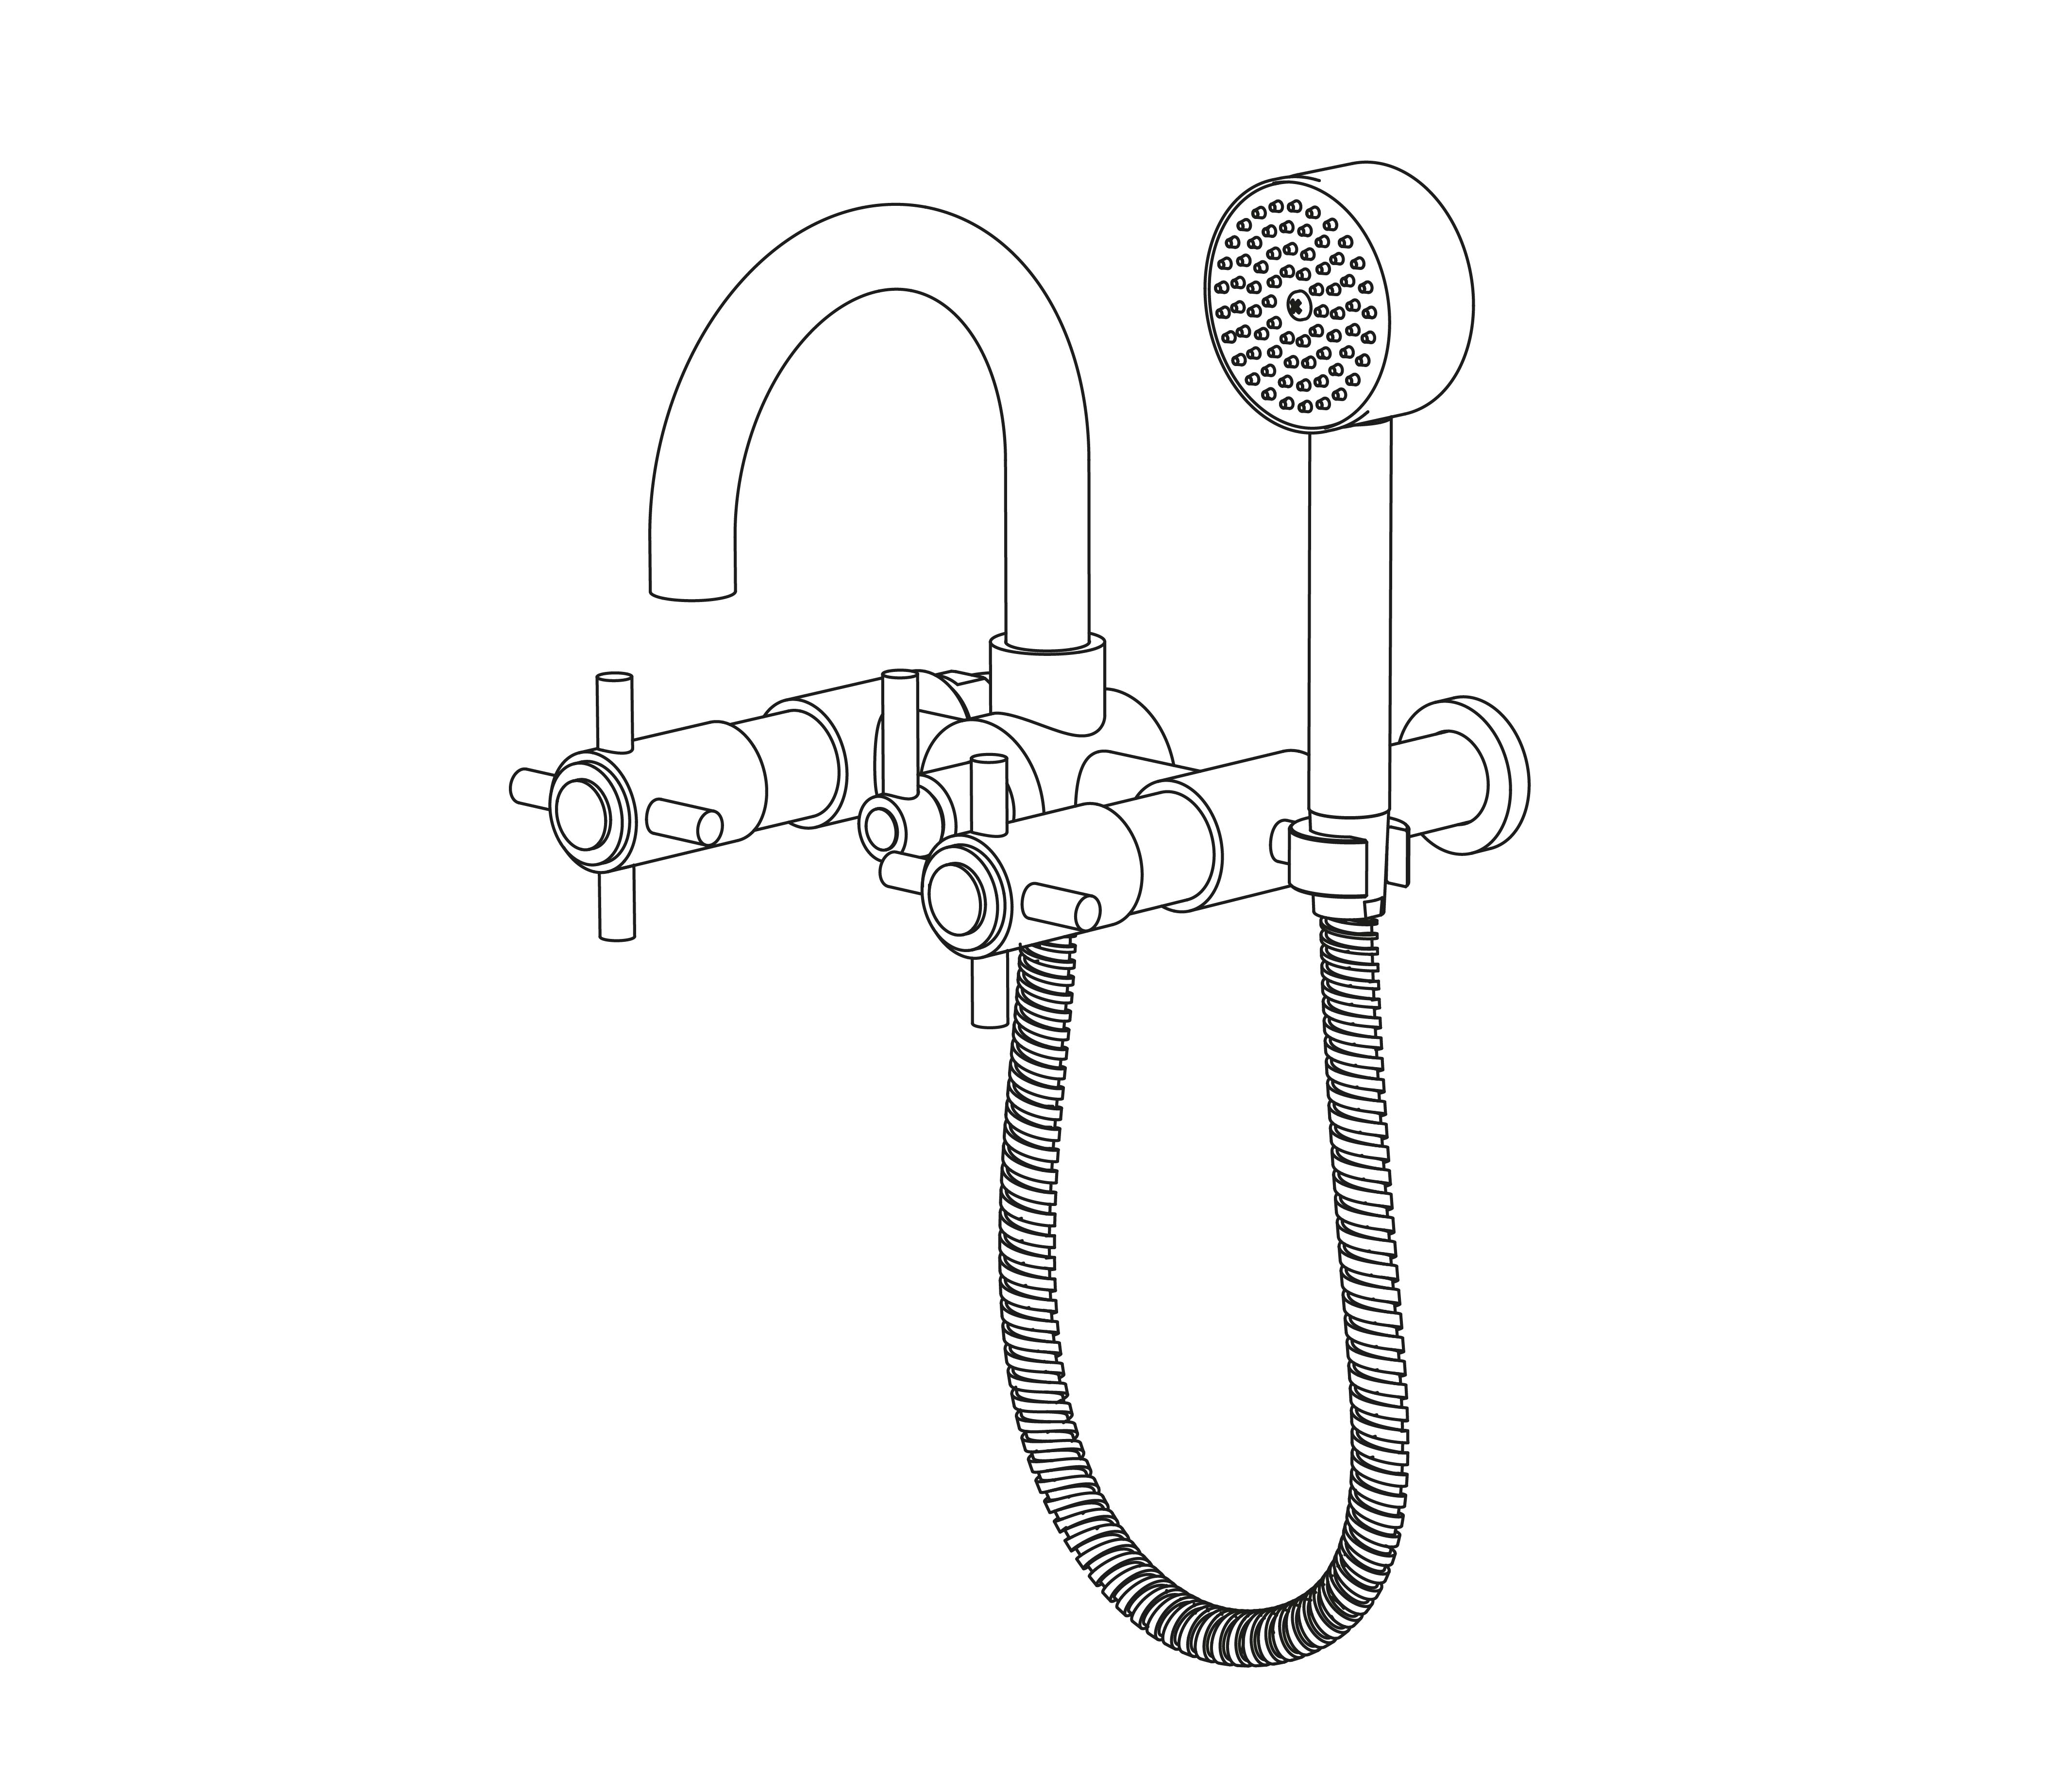 C31-3201 Wall mounted bath and shower mixer